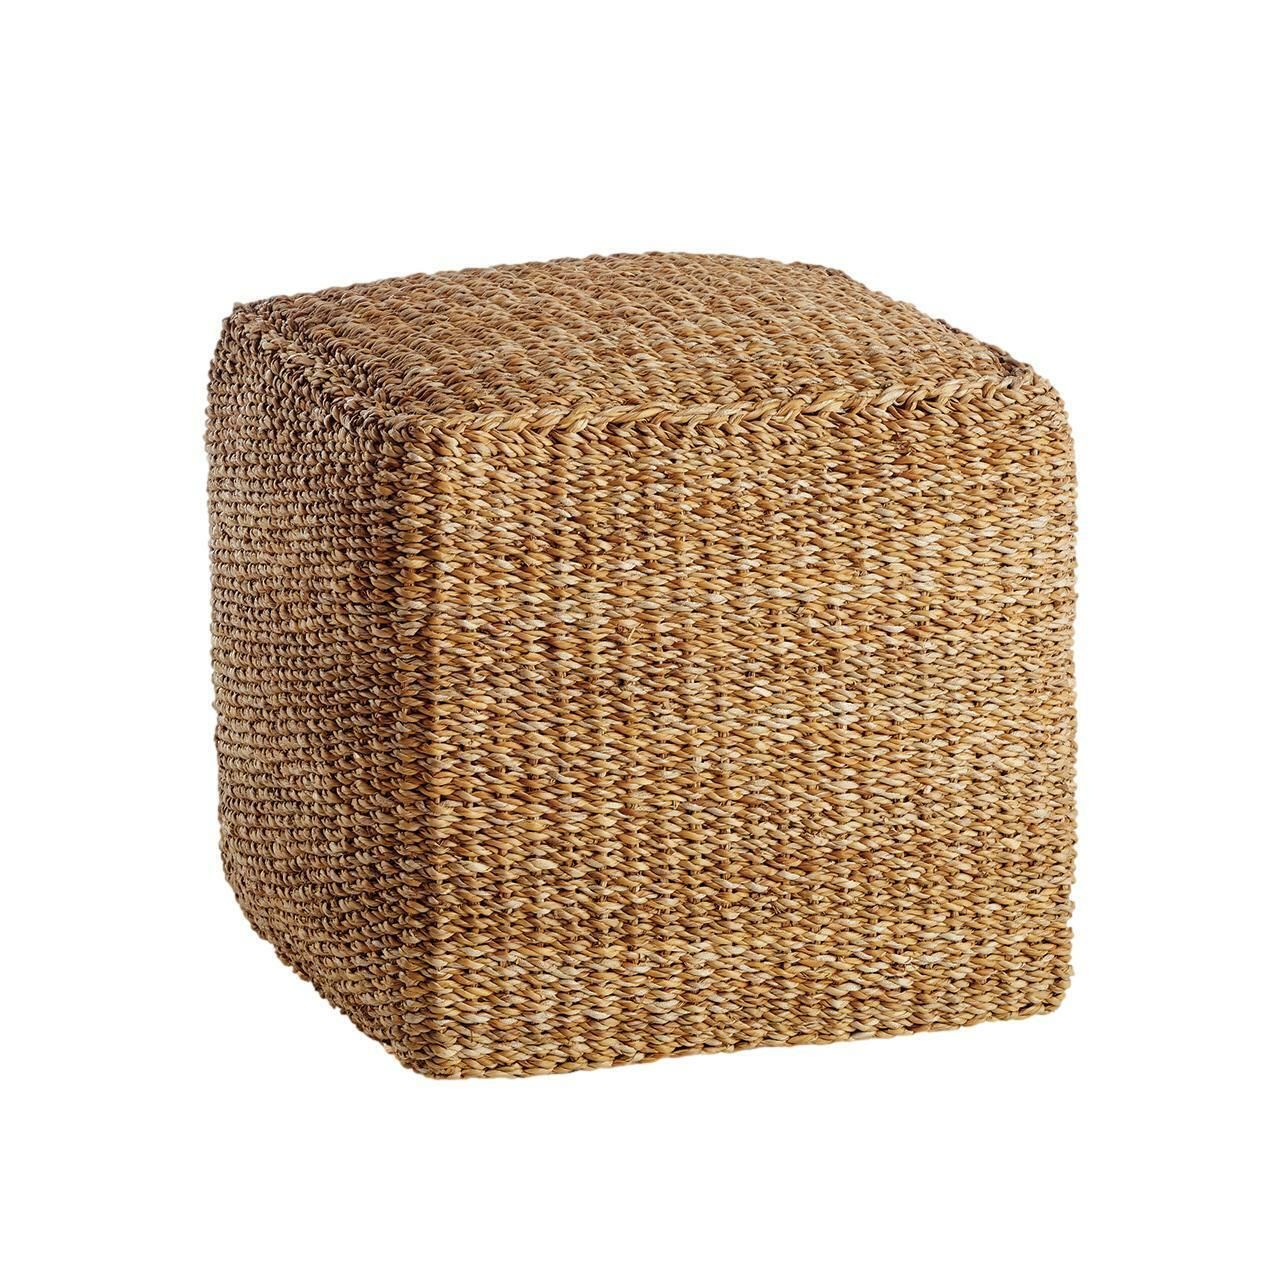 Casual Woven Seagrass Square Cube Pouf Natural Coastal Cottage Ottoman  Table | Ebay Pertaining To Natural Ottomans (View 10 of 15)